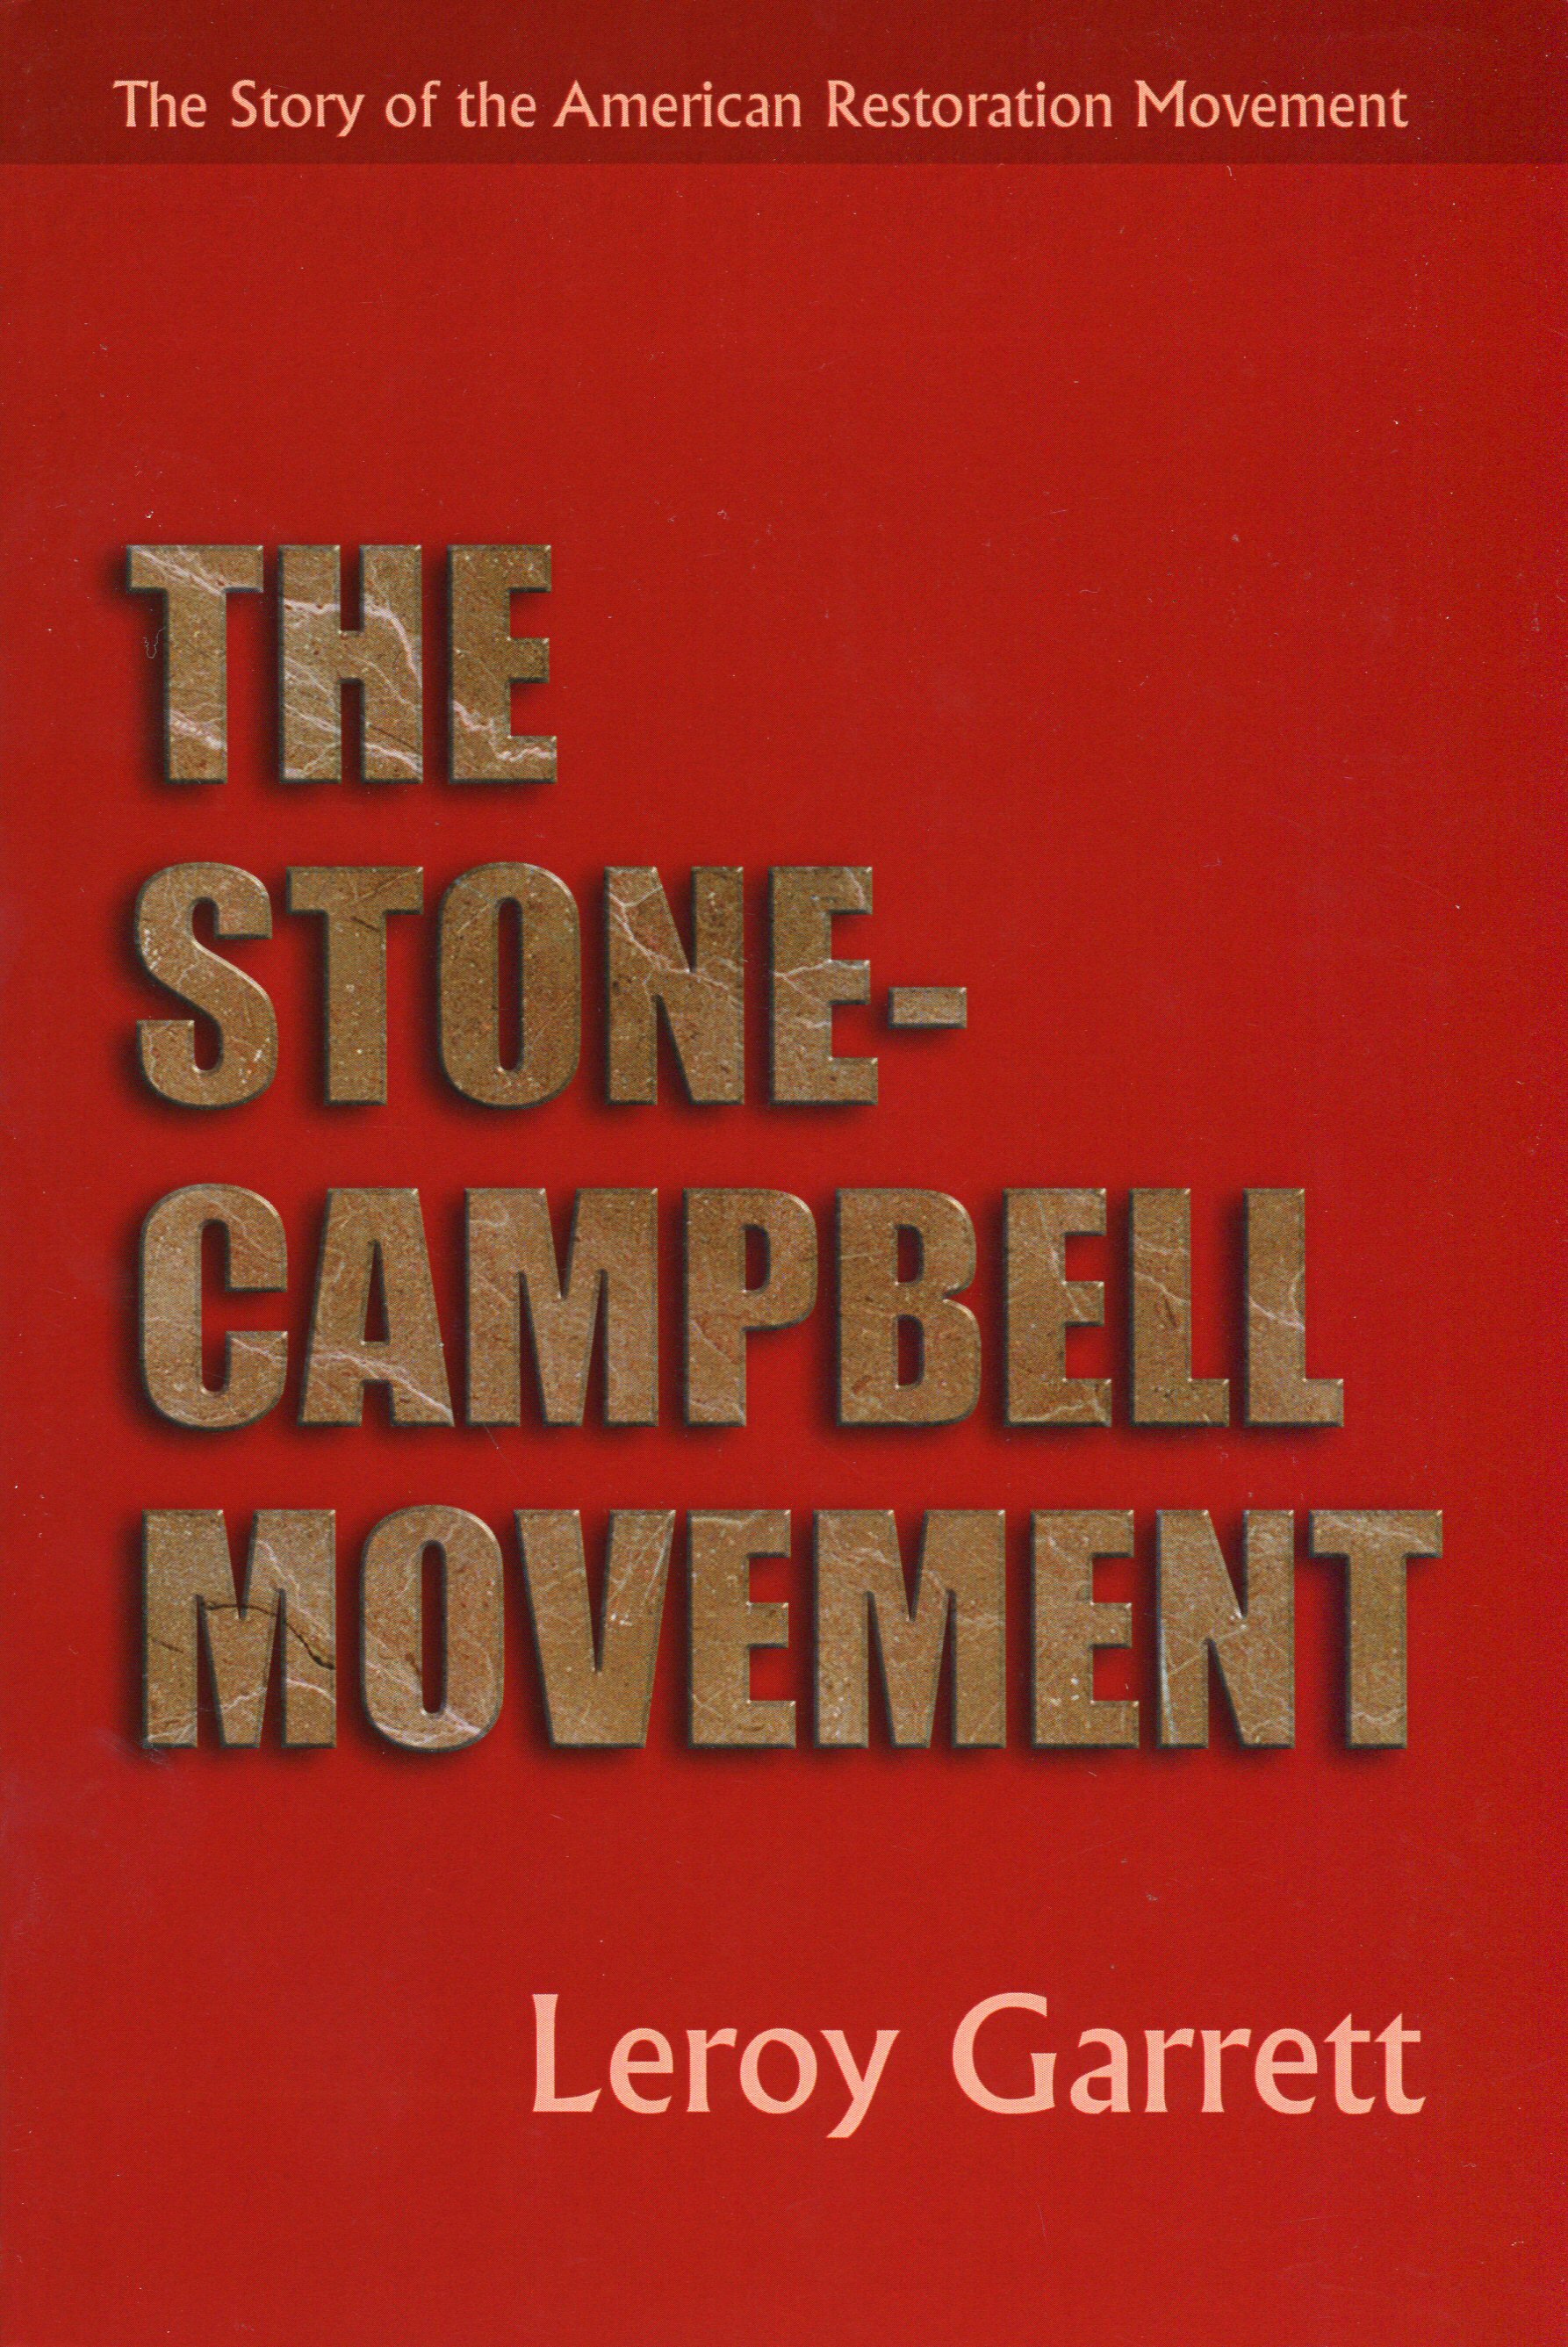 The Stone-Campbell Movement: The Story of the American Restoration Movement, rev. ed.